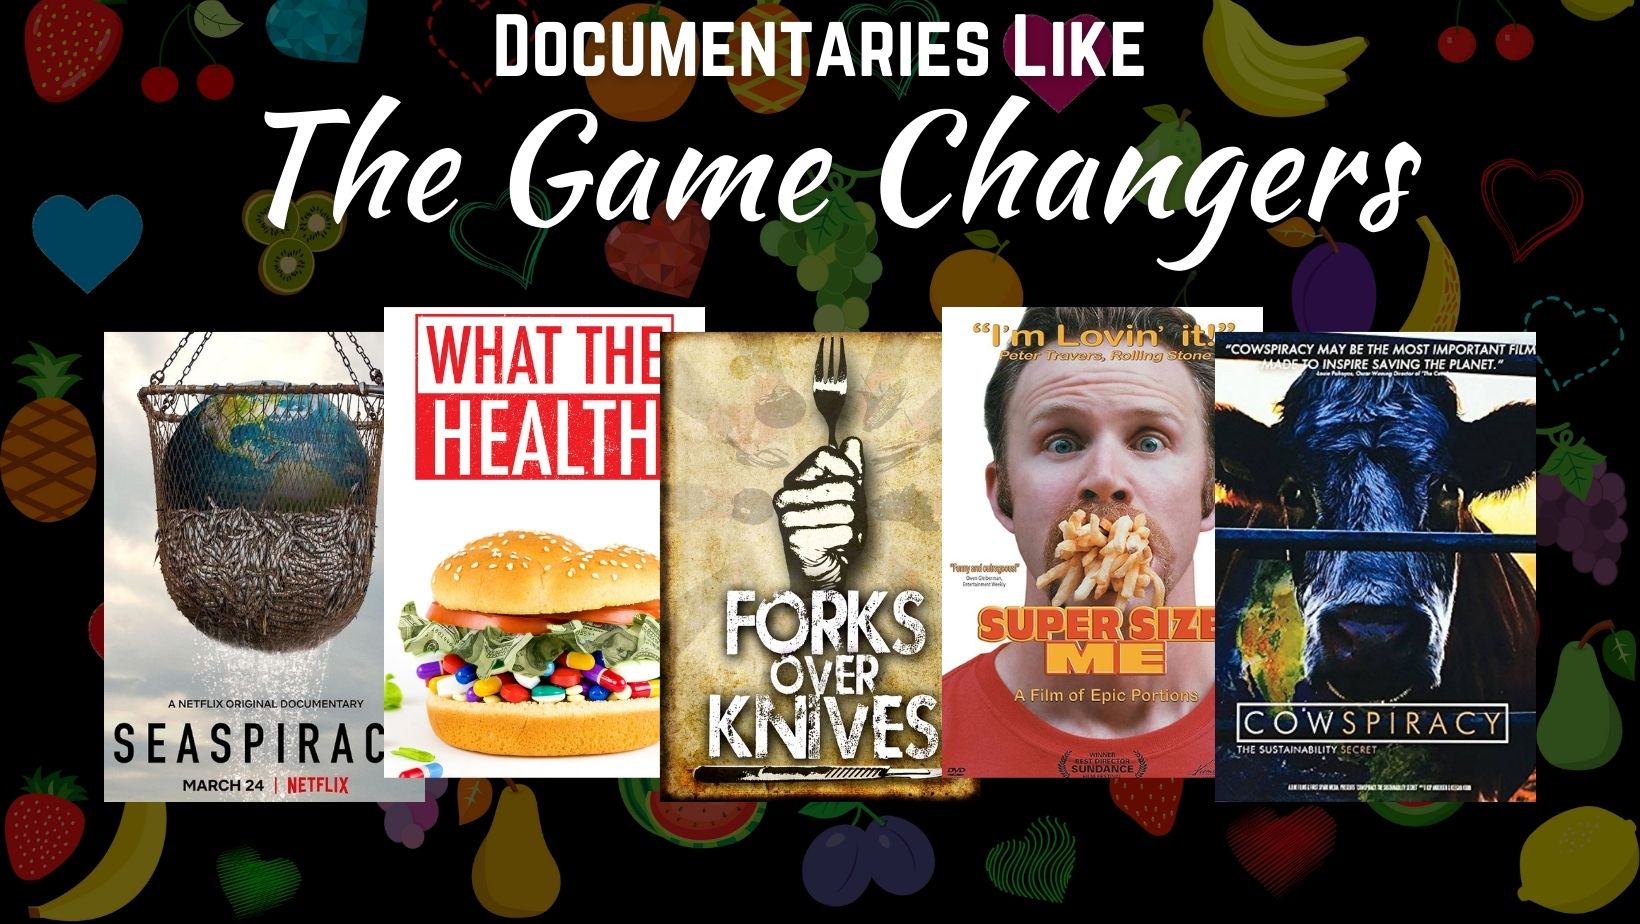 Like This Watch That: Documentaries Like The Game Changers (2018)